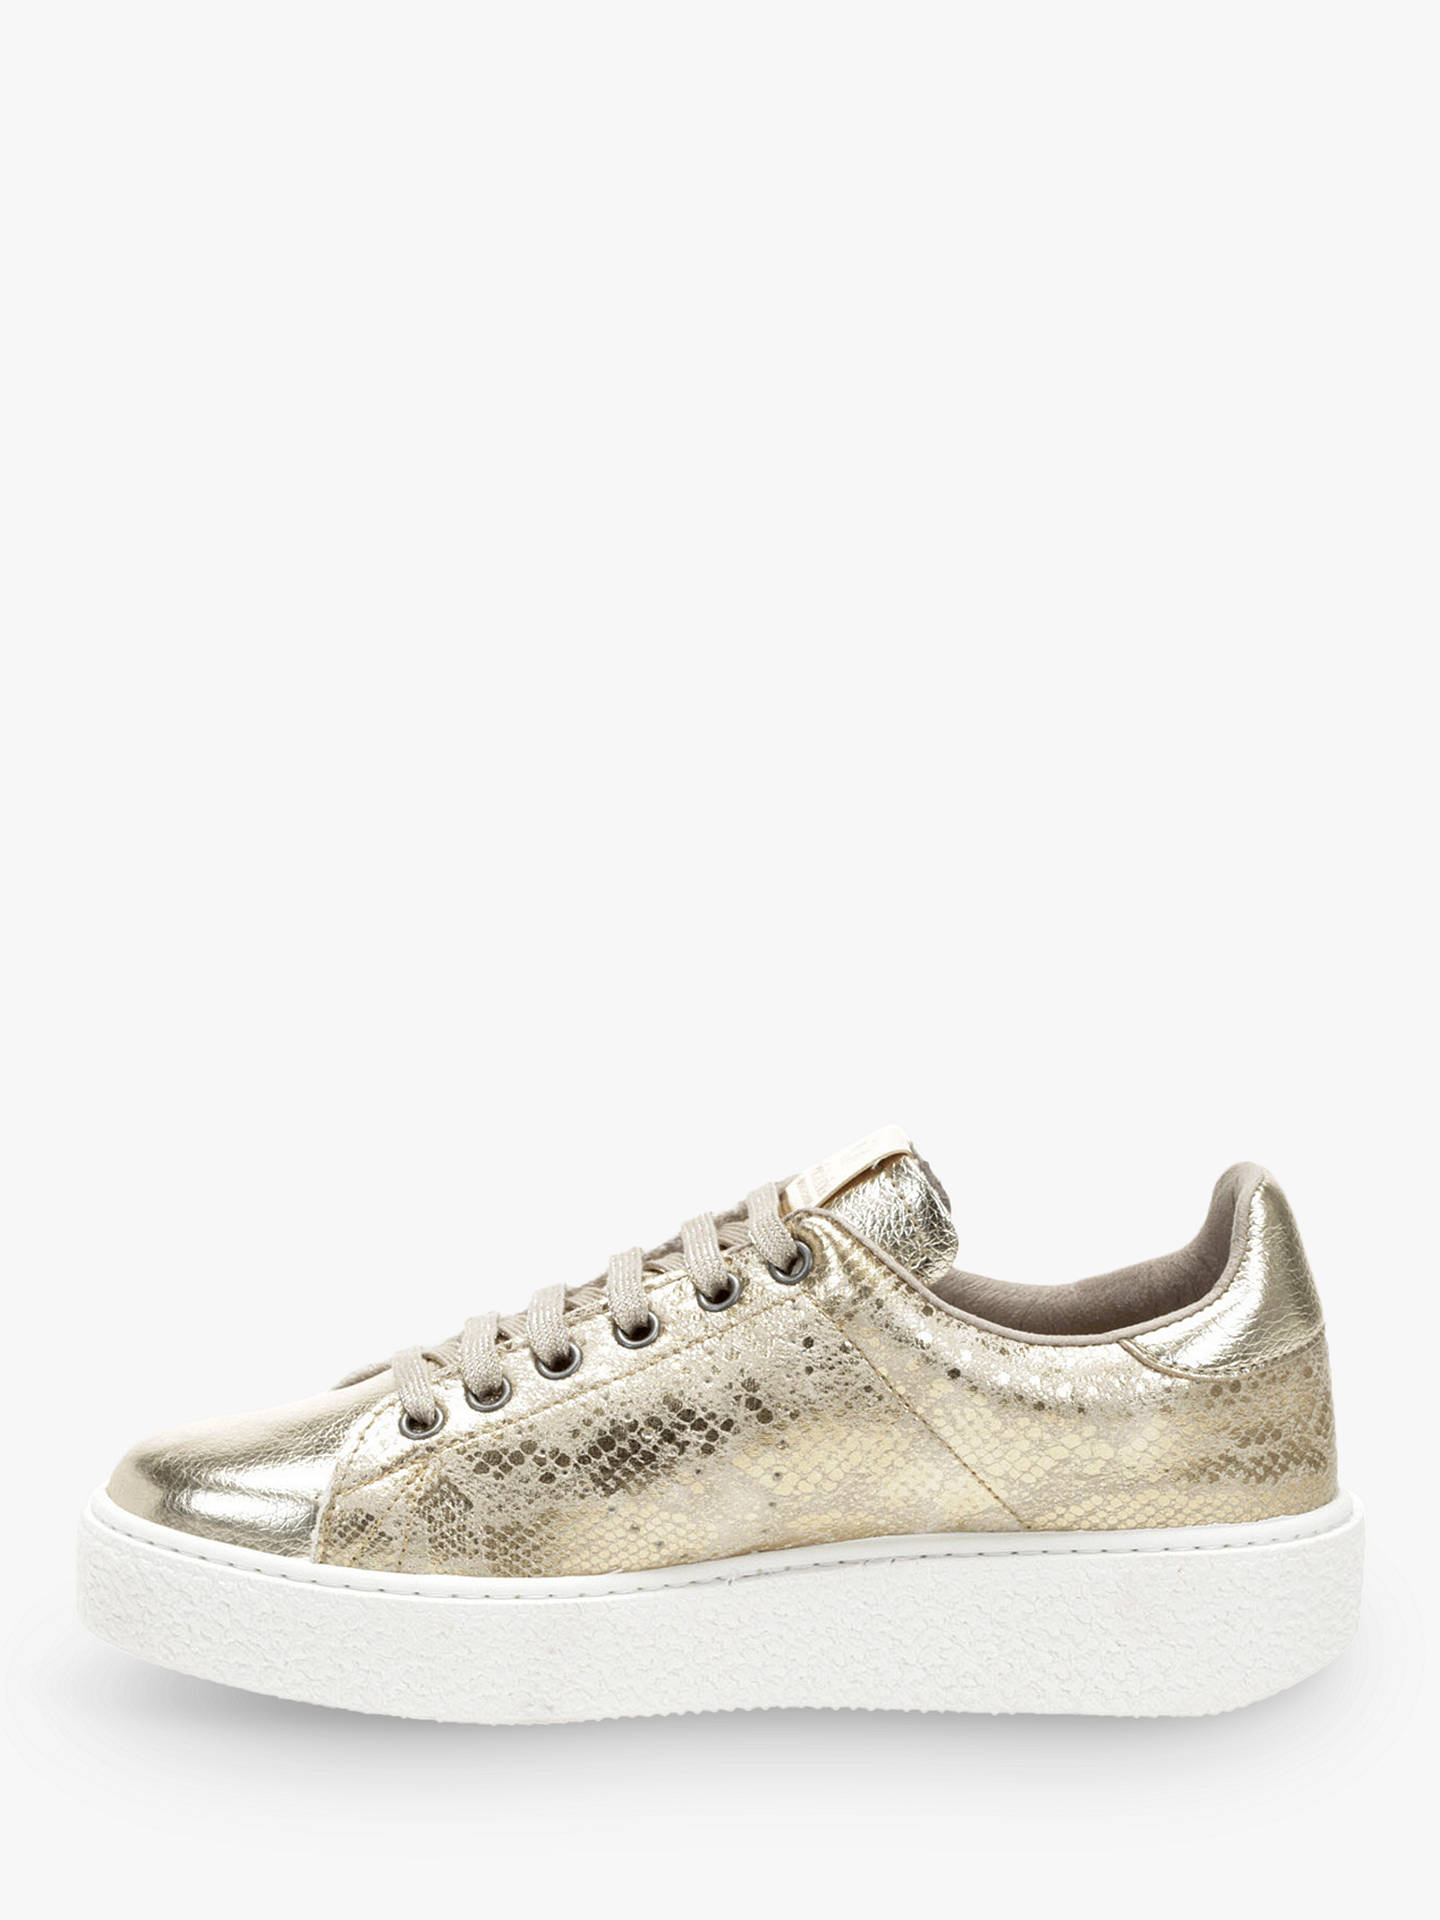 Victoria Shoes Utopia Lace Up Trainers, Gold at John Lewis & Partners